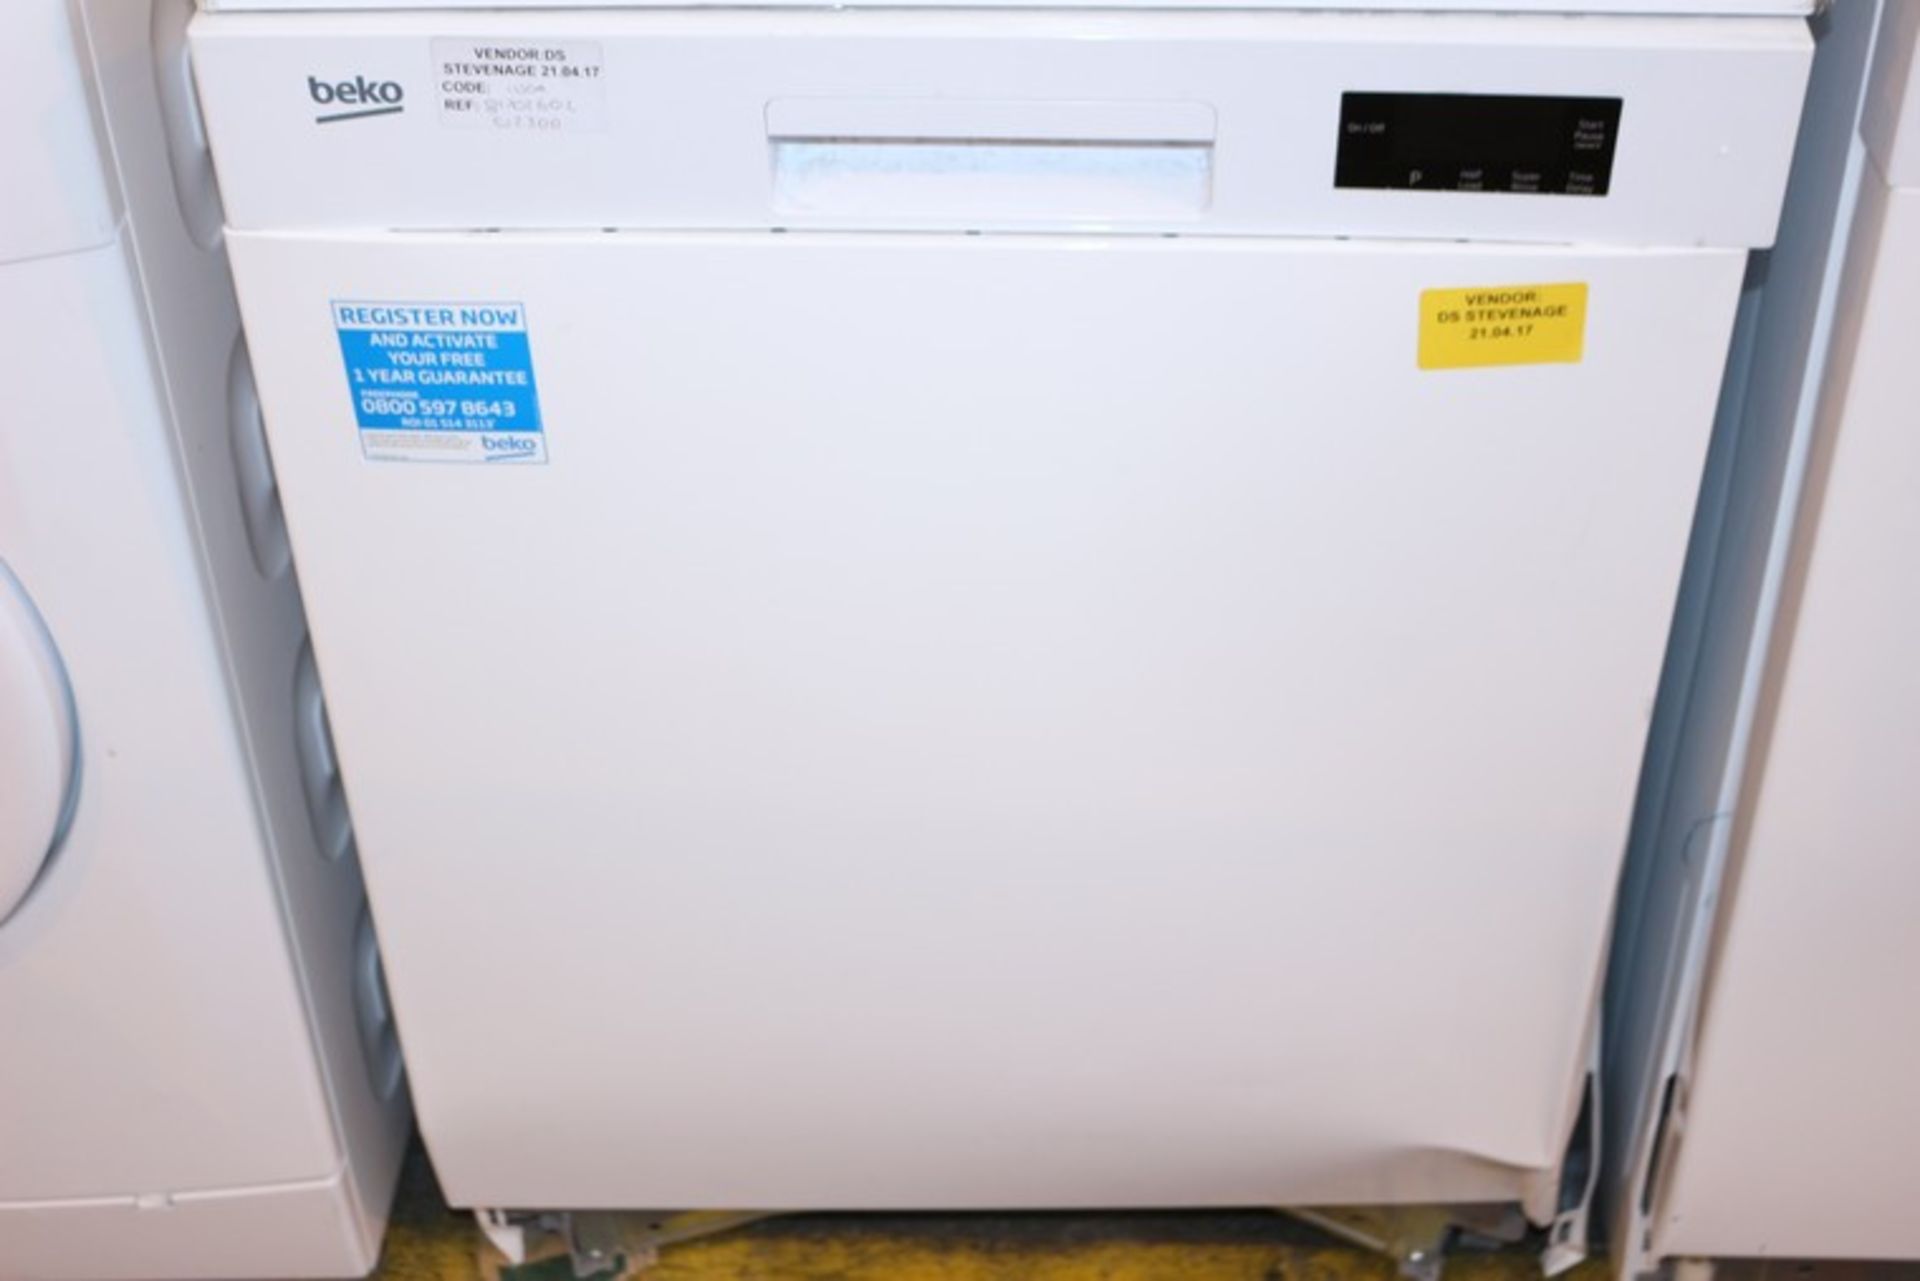 1 x BEKO DISHWASHER IN WHITE RRP £230 (21.4.17)(81702602) *PLEASE NOTE THAT THE BID PRICE IS